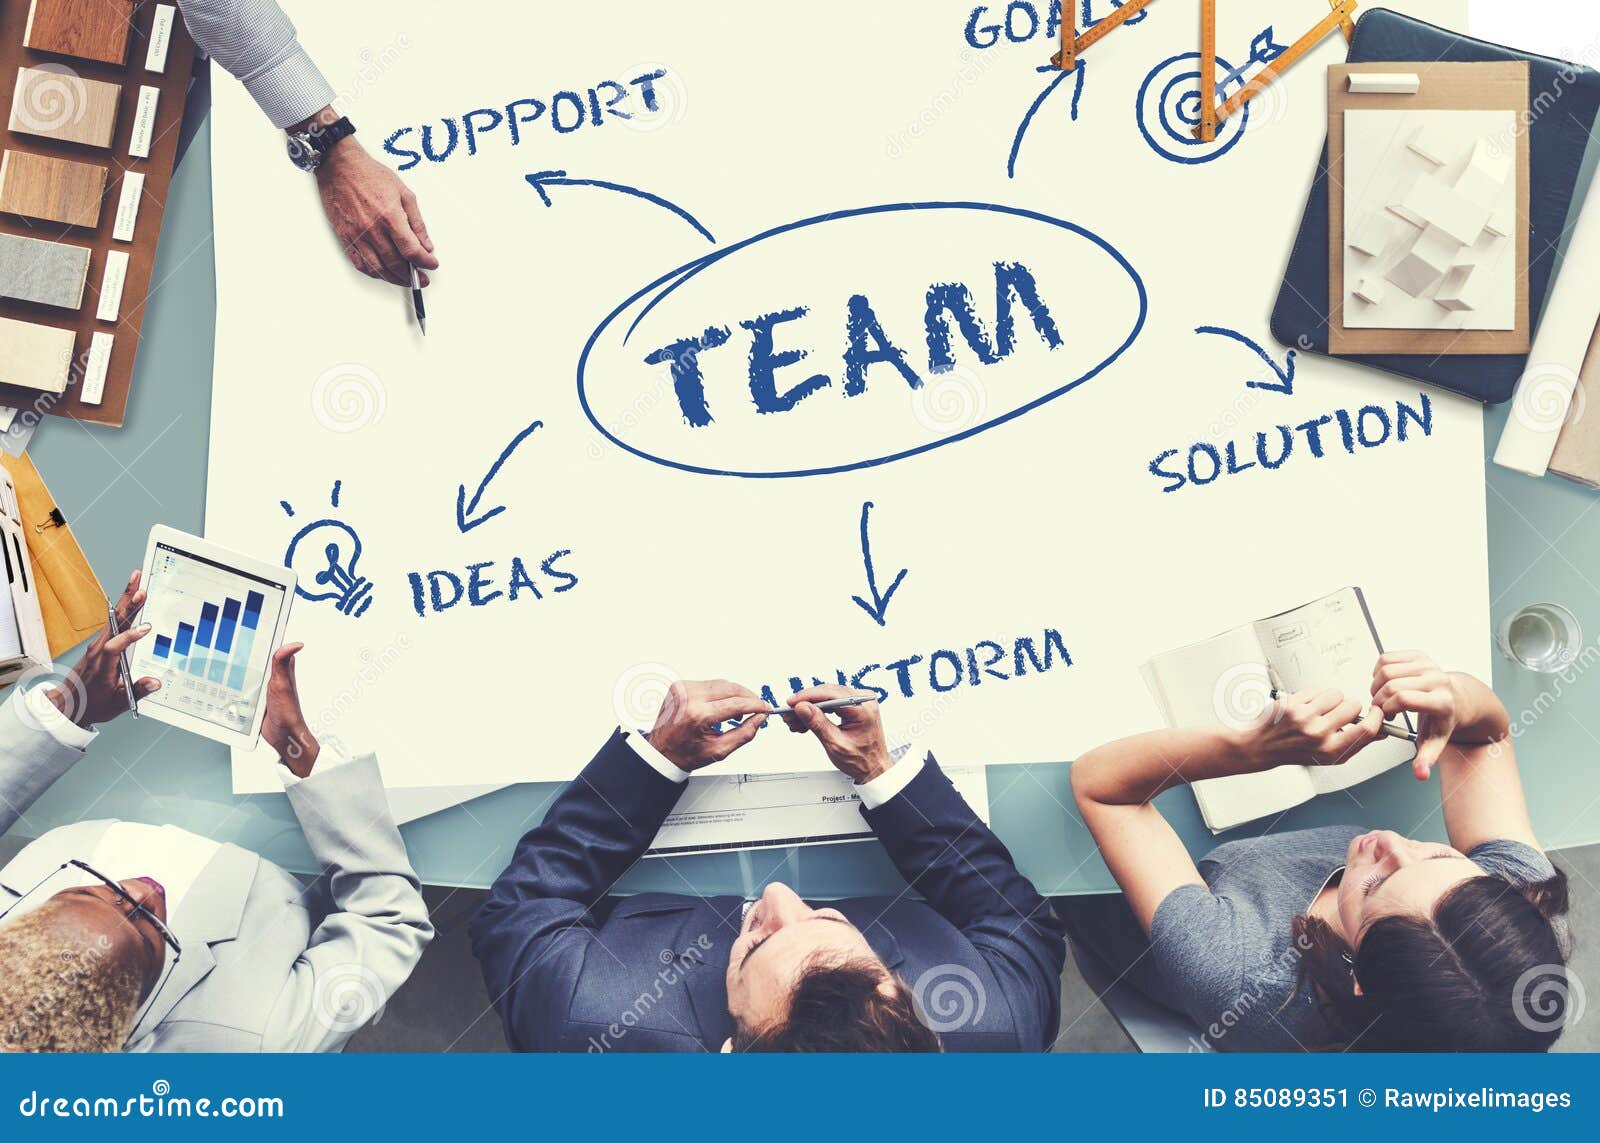 Team Support Ideas Business Concept Stock Image - Image of interior, occupation: 85089351